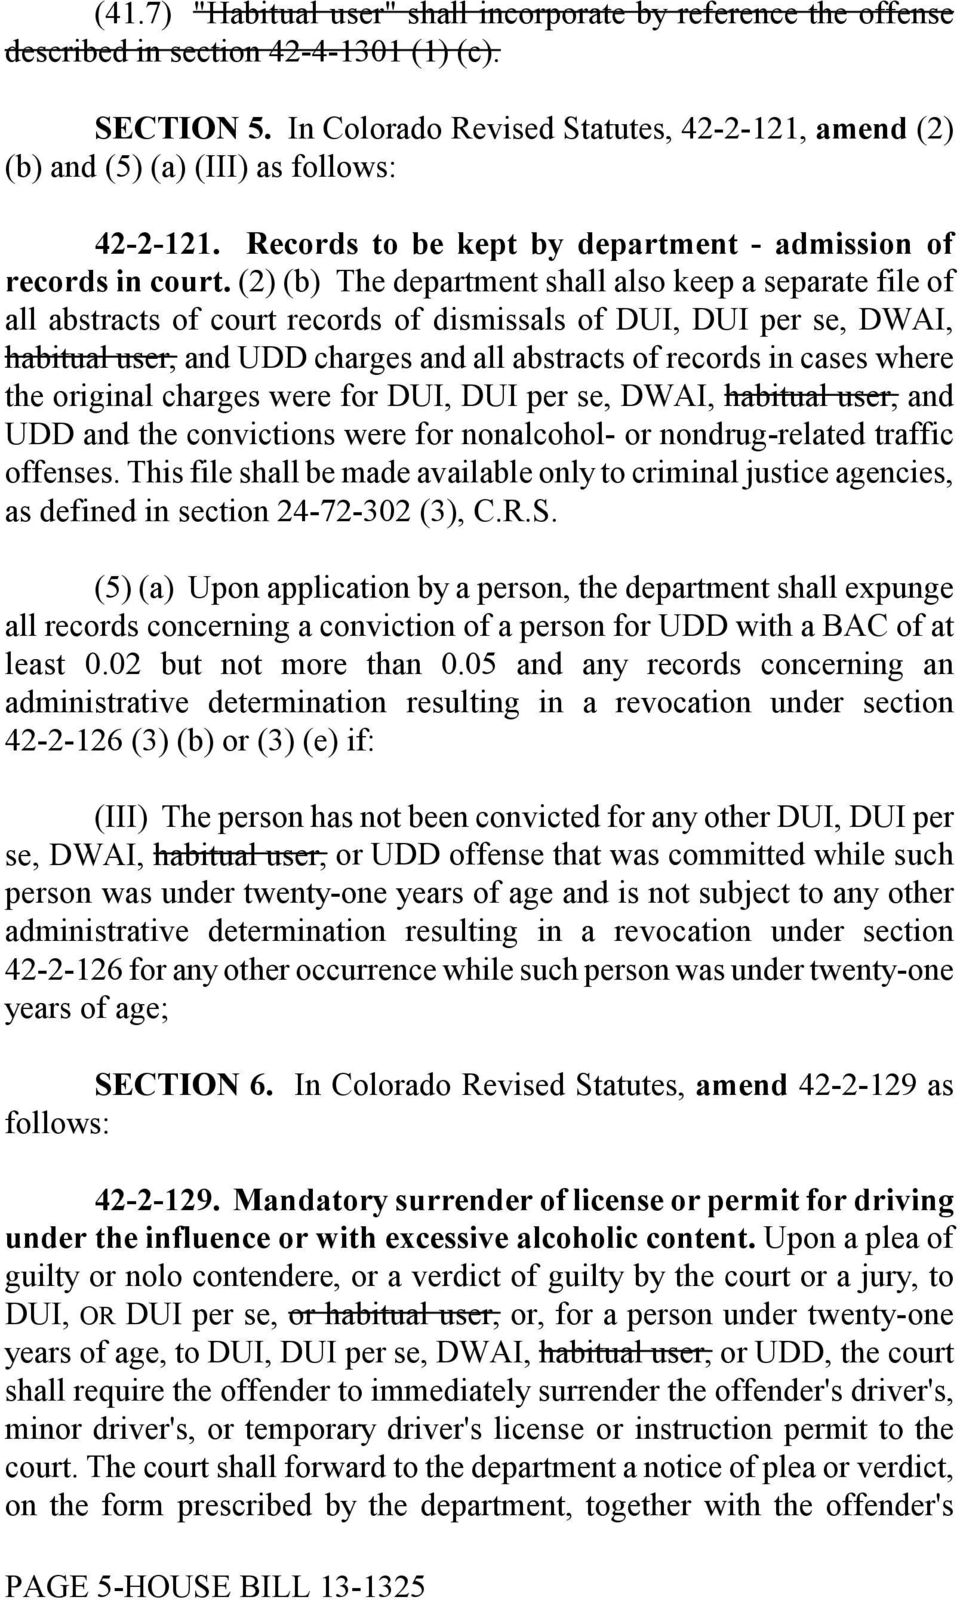 (2) (b) The department shall also keep a separate file of all abstracts of court records of dismissals of DUI, DUI per se, DWAI, habitual user, and UDD charges and all abstracts of records in cases